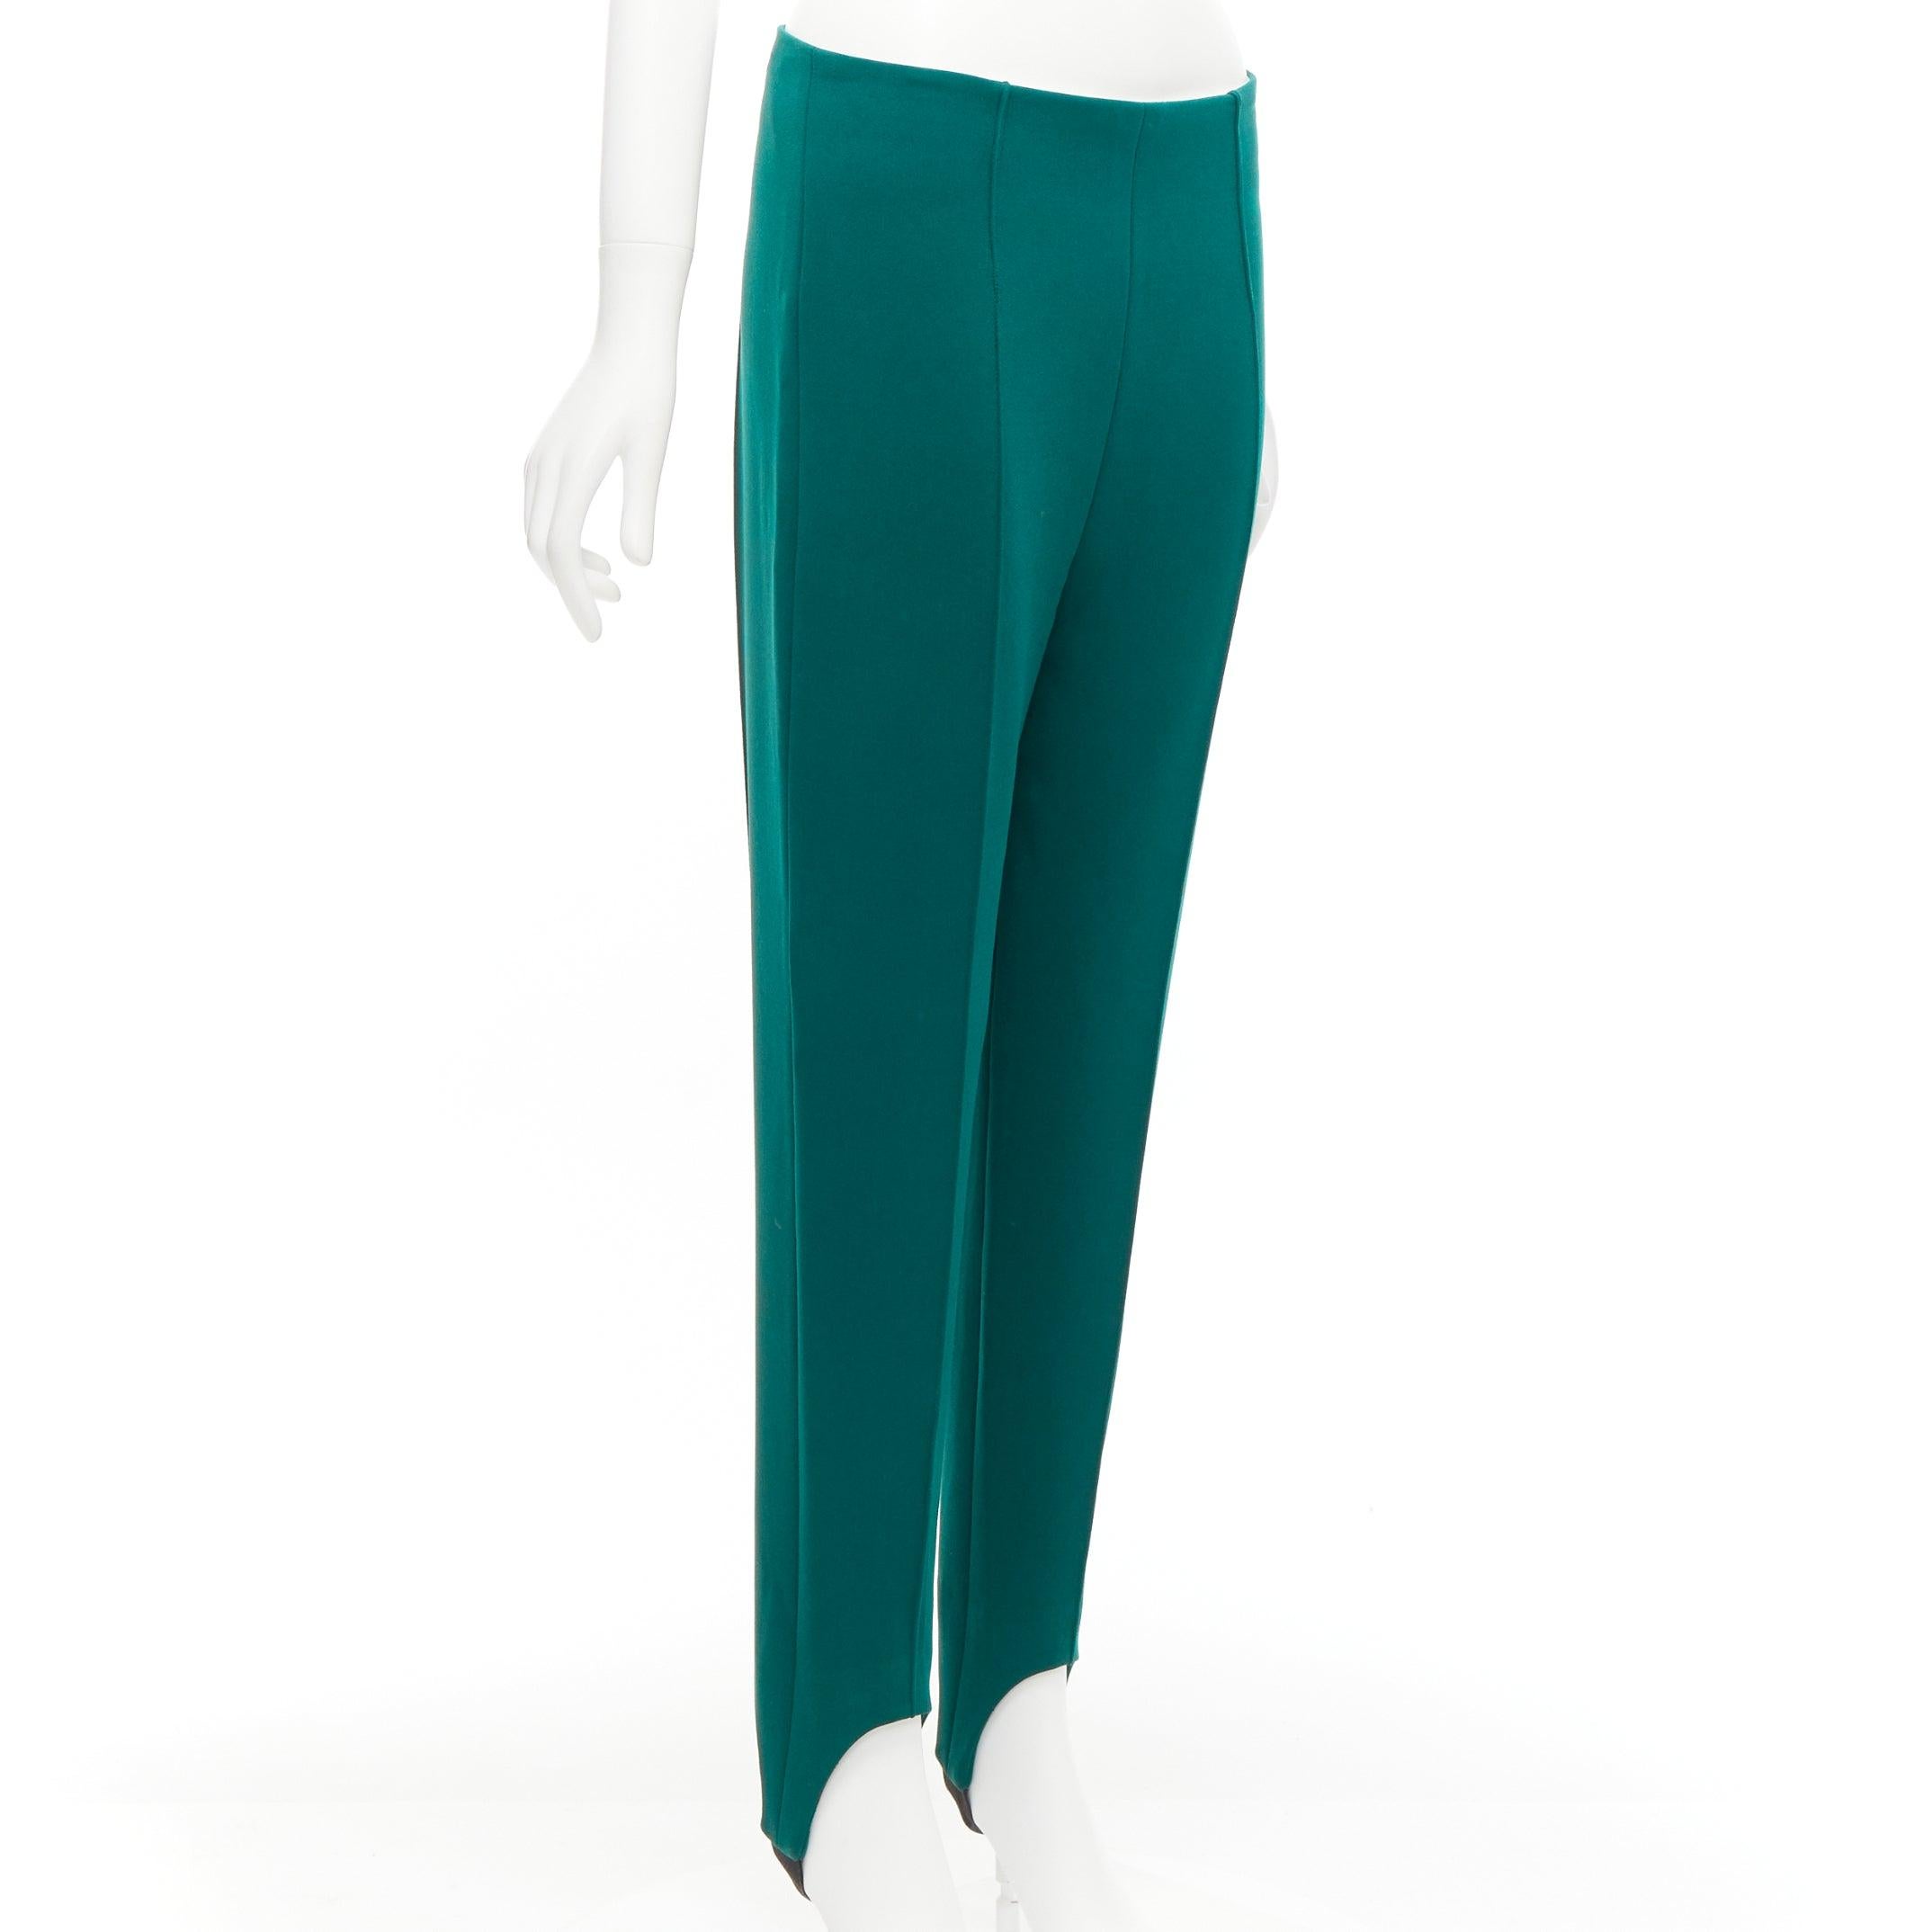 MARNI green pleat front stirrup jodphur pants IT38 XS
Reference: CELG/A00255
Brand: Marni
Material: Triacetate, Blend
Color: Green
Pattern: Solid
Closure: Zip
Extra Details: Side zip.
Made in: Italy

CONDITION:
Condition: Very good, this item was